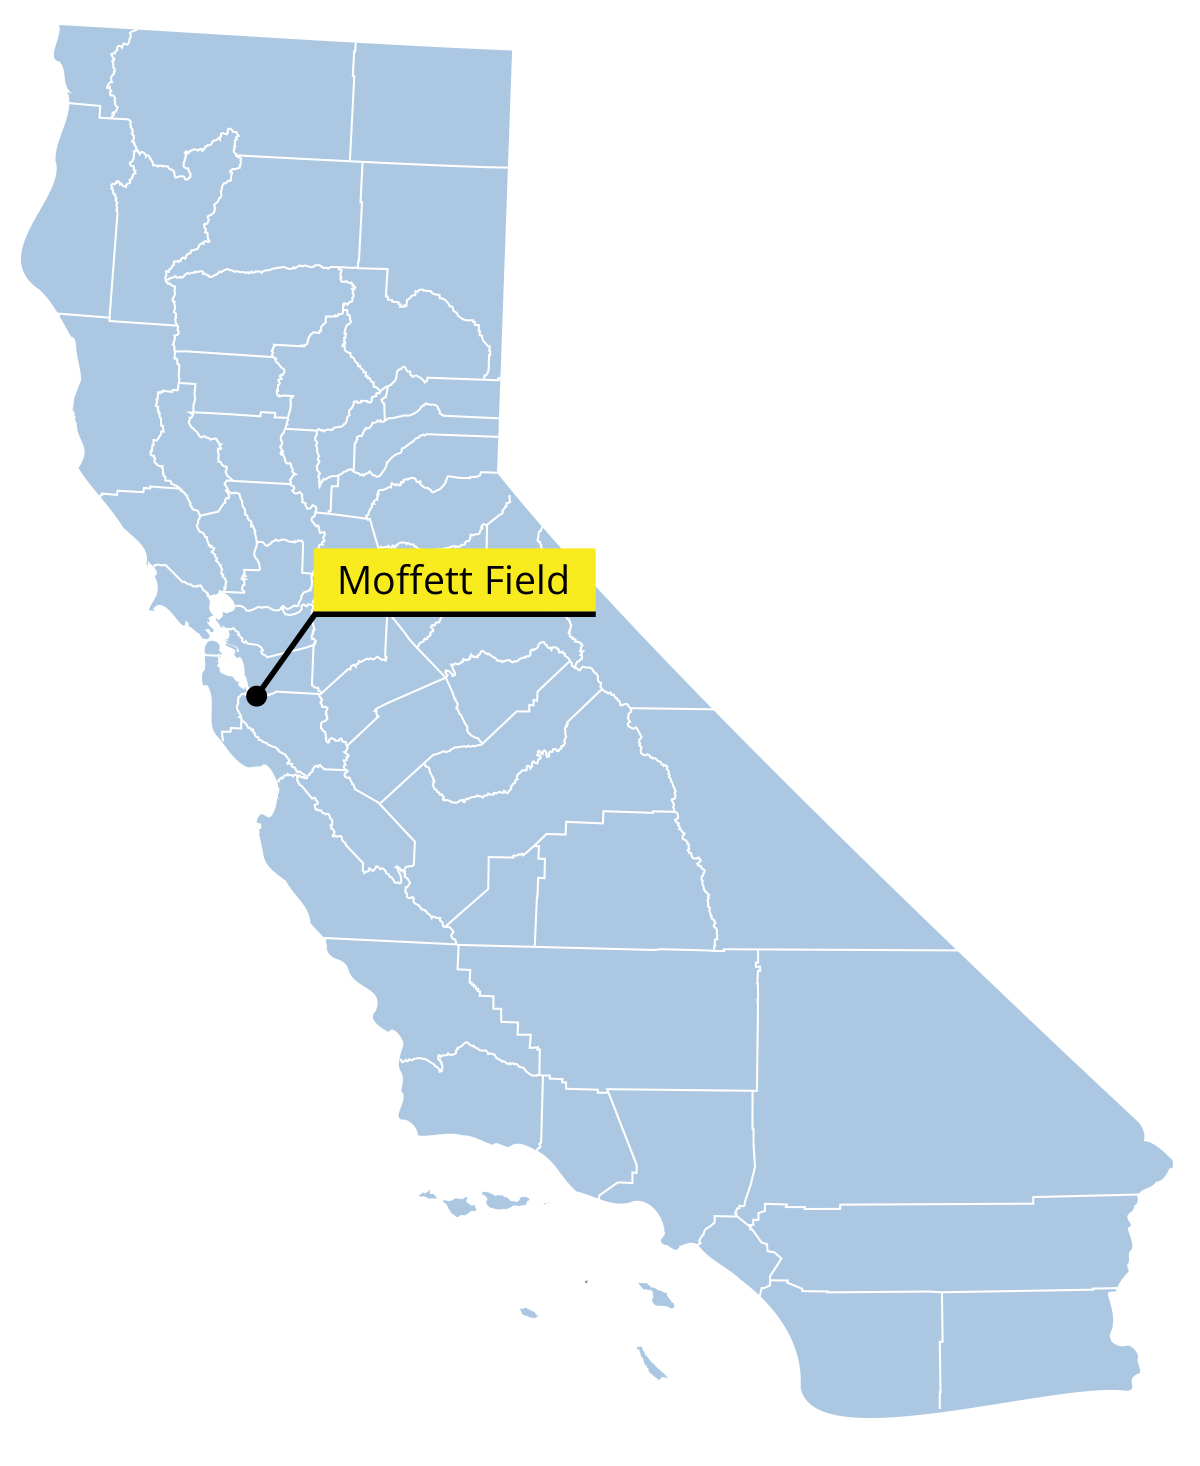 A map of the state of California identifying the location of Moffett Field adjacent to the San Francisco Bay.